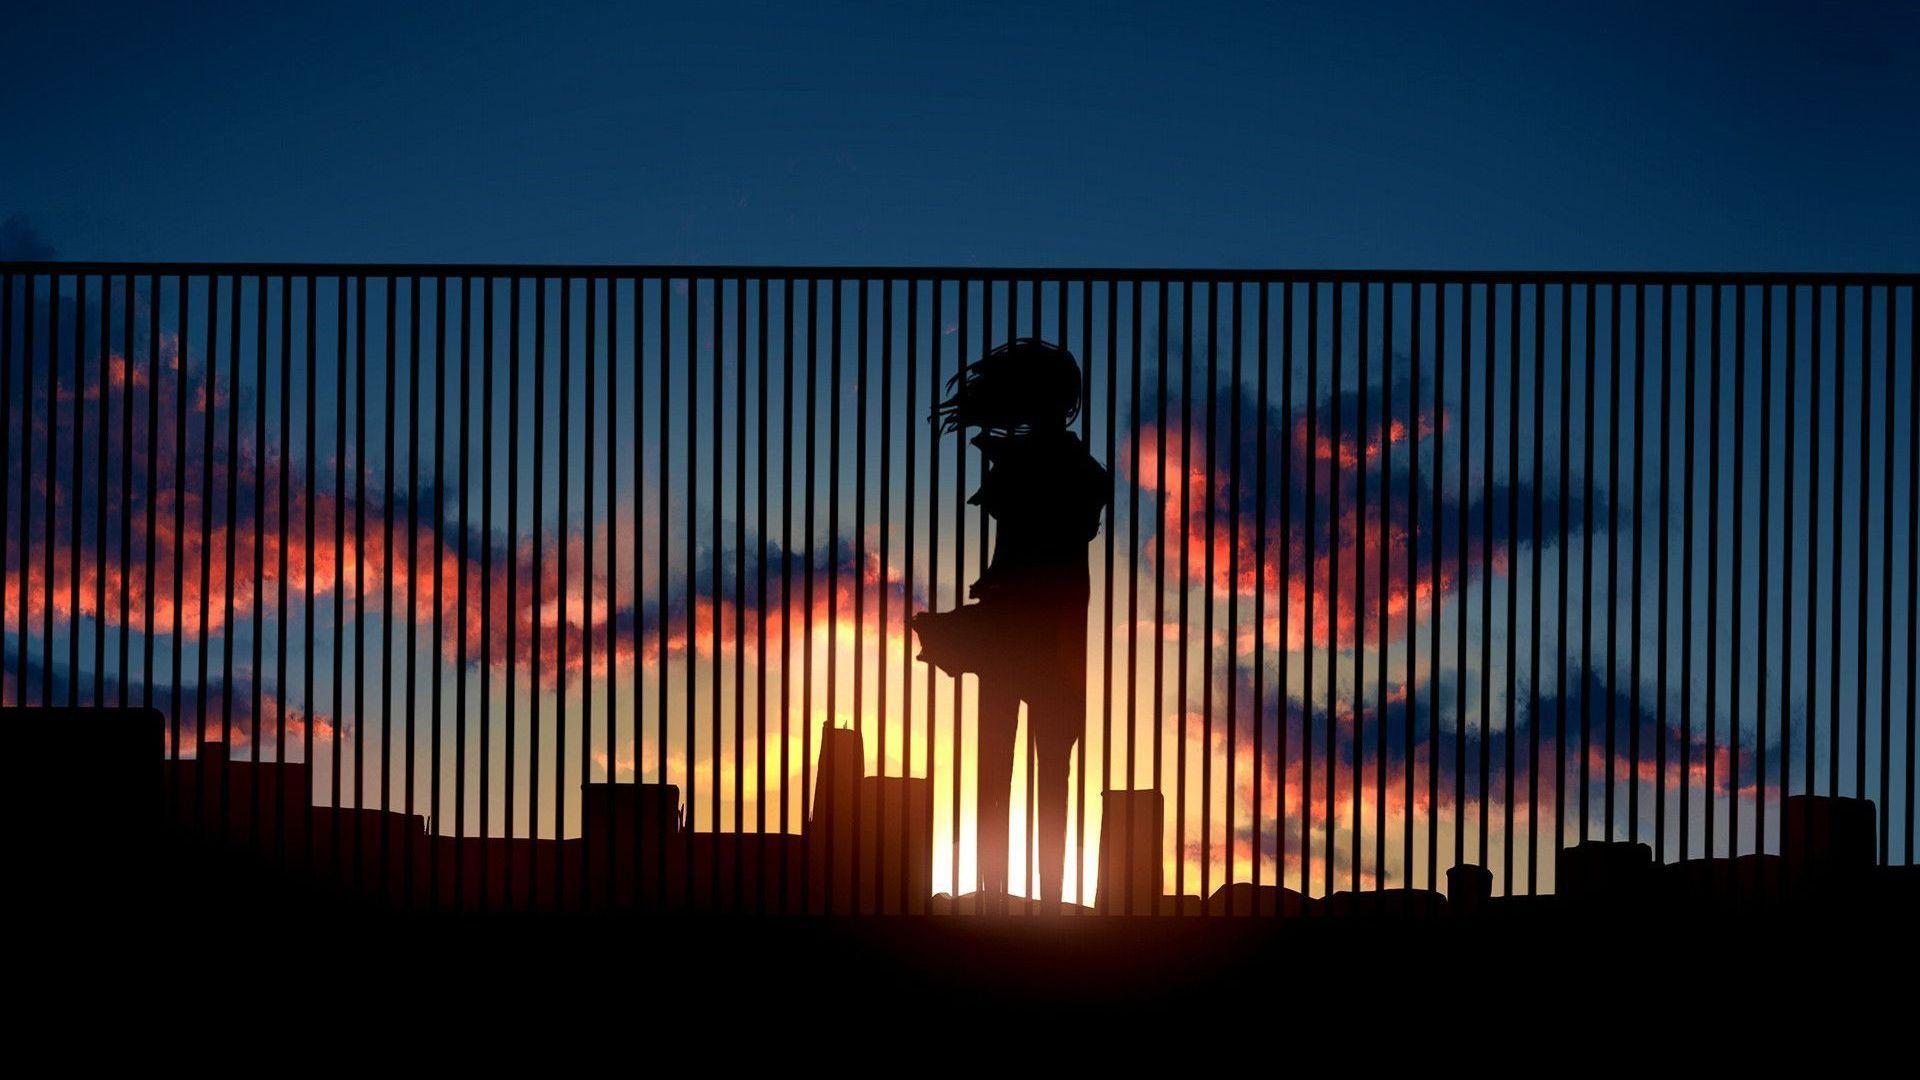 #clouds, #rooftops, #sunset, #anime, #artwork, #anime